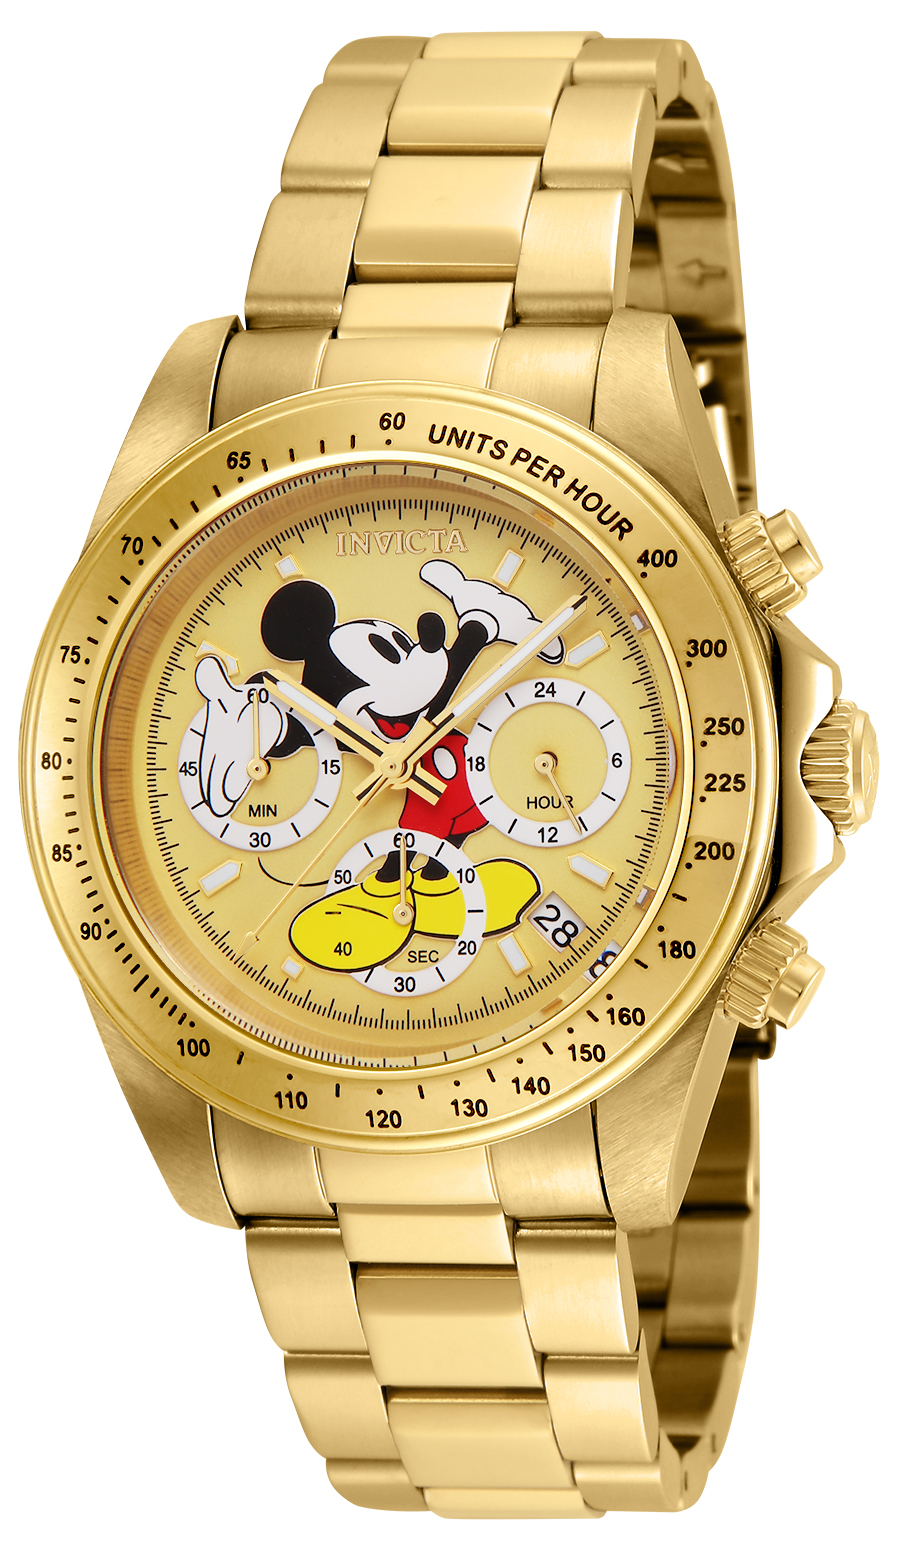 Invicta Disney Limited Edition Mickey Mouse Men's Watch - 39.5mm, Gold (25196)